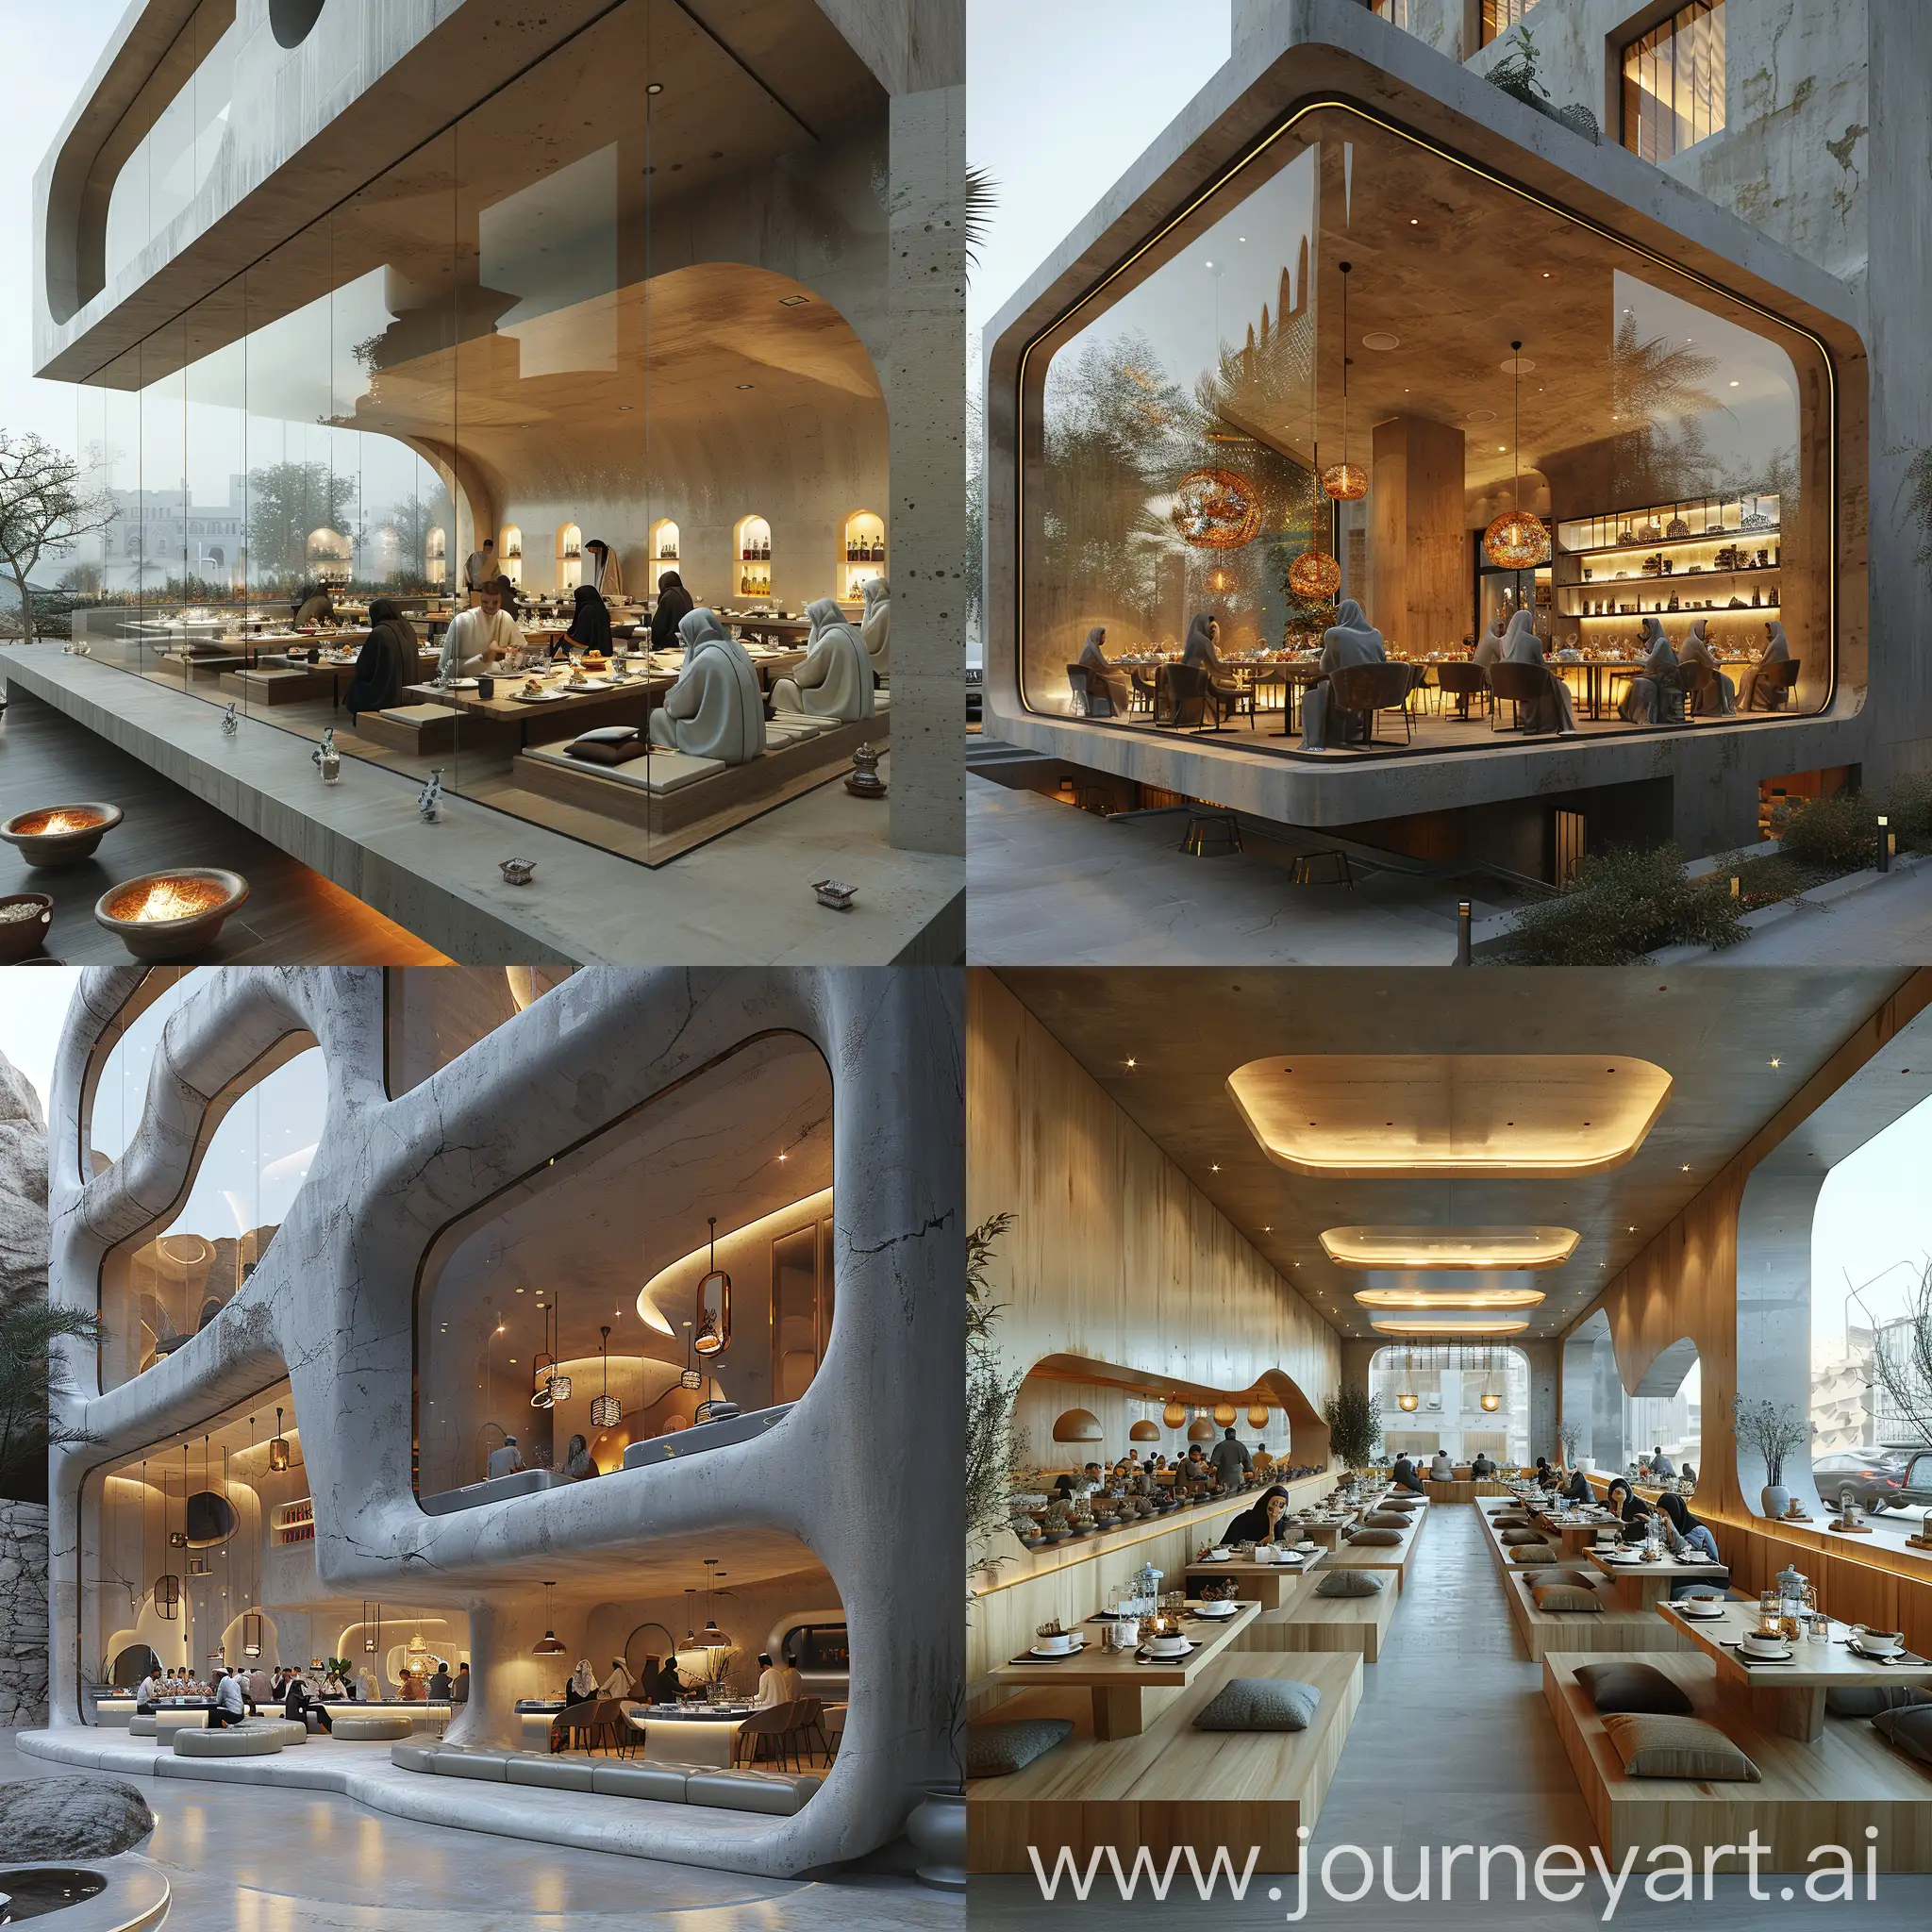 hyper realistic minimal modern interior design for a cantilever restaurant with people eating in Hijazi Arabian style --s 750